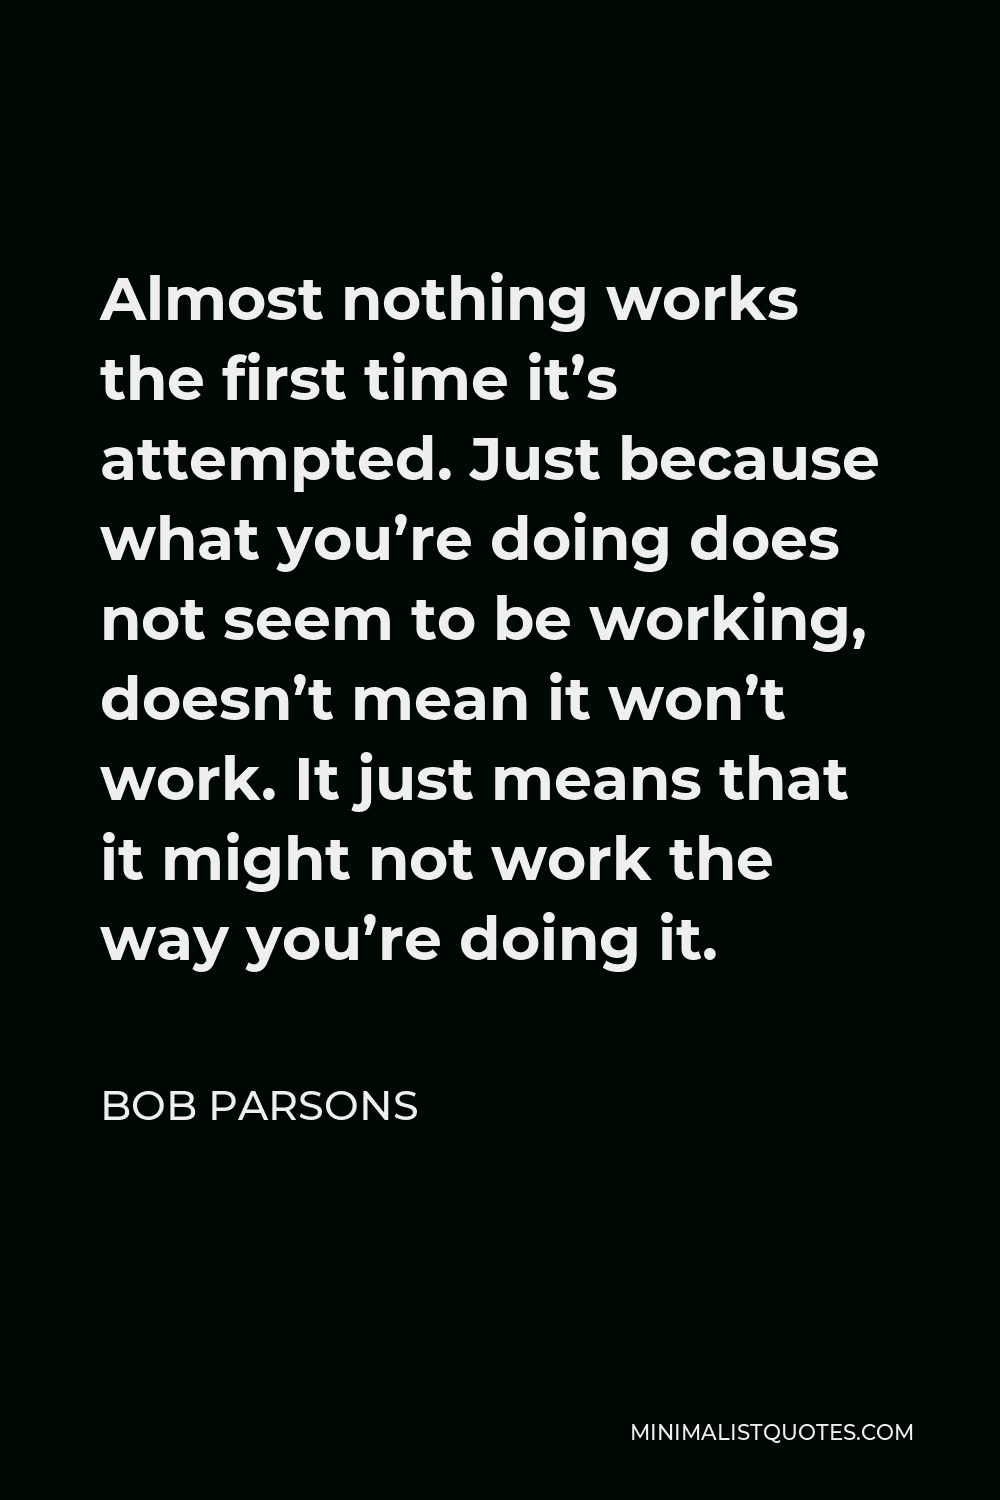 Bob Parsons Quote - Almost nothing works the first time it’s attempted. Just because what you’re doing does not seem to be working, doesn’t mean it won’t work. It just means that it might not work the way you’re doing it.